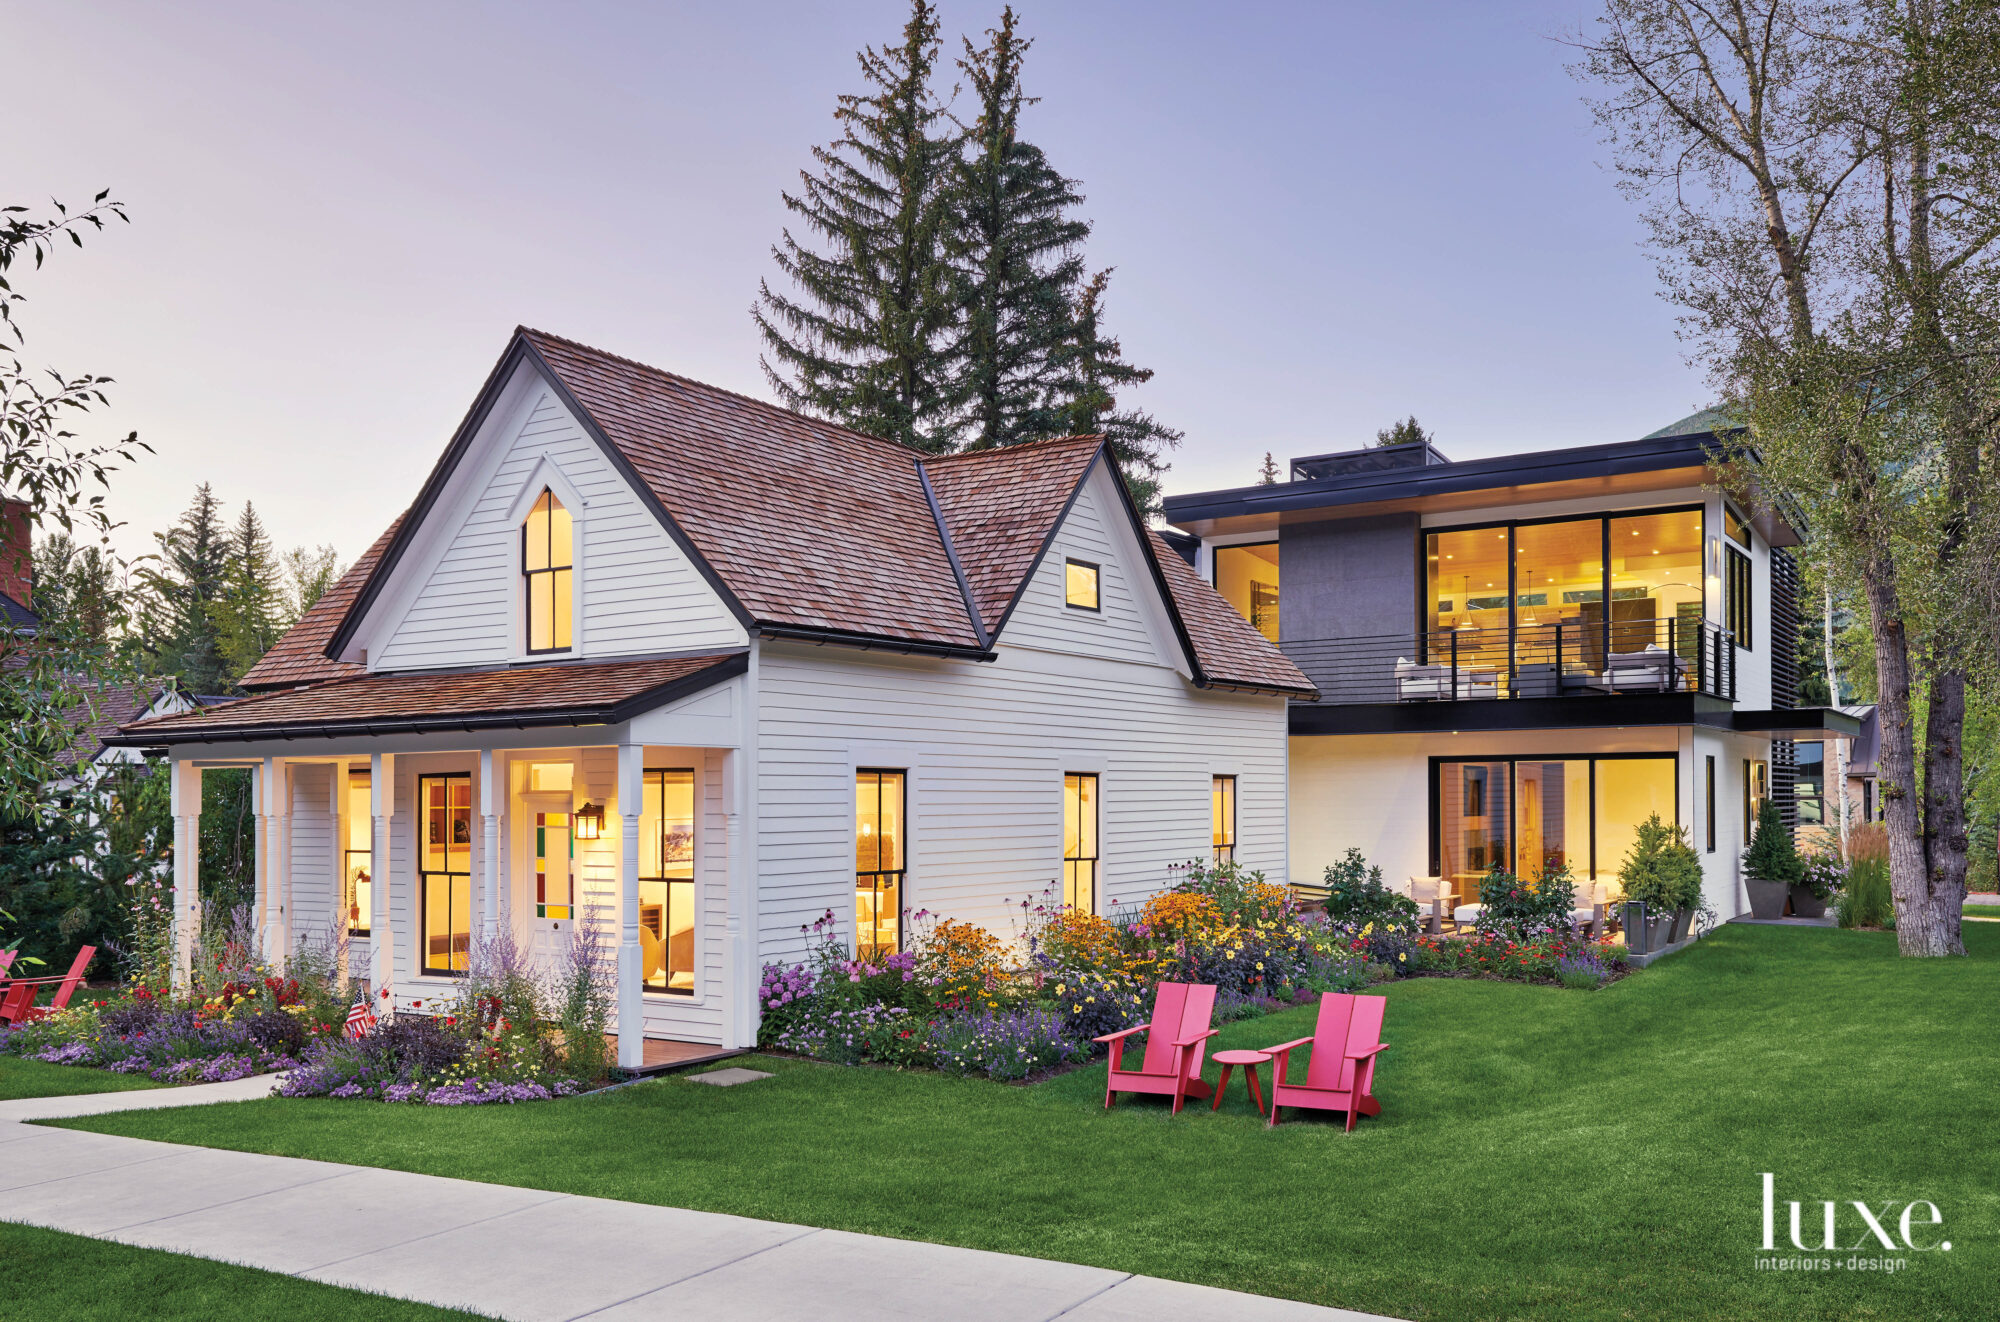 In front of the modern home sits a remodeled Victorian-era home.